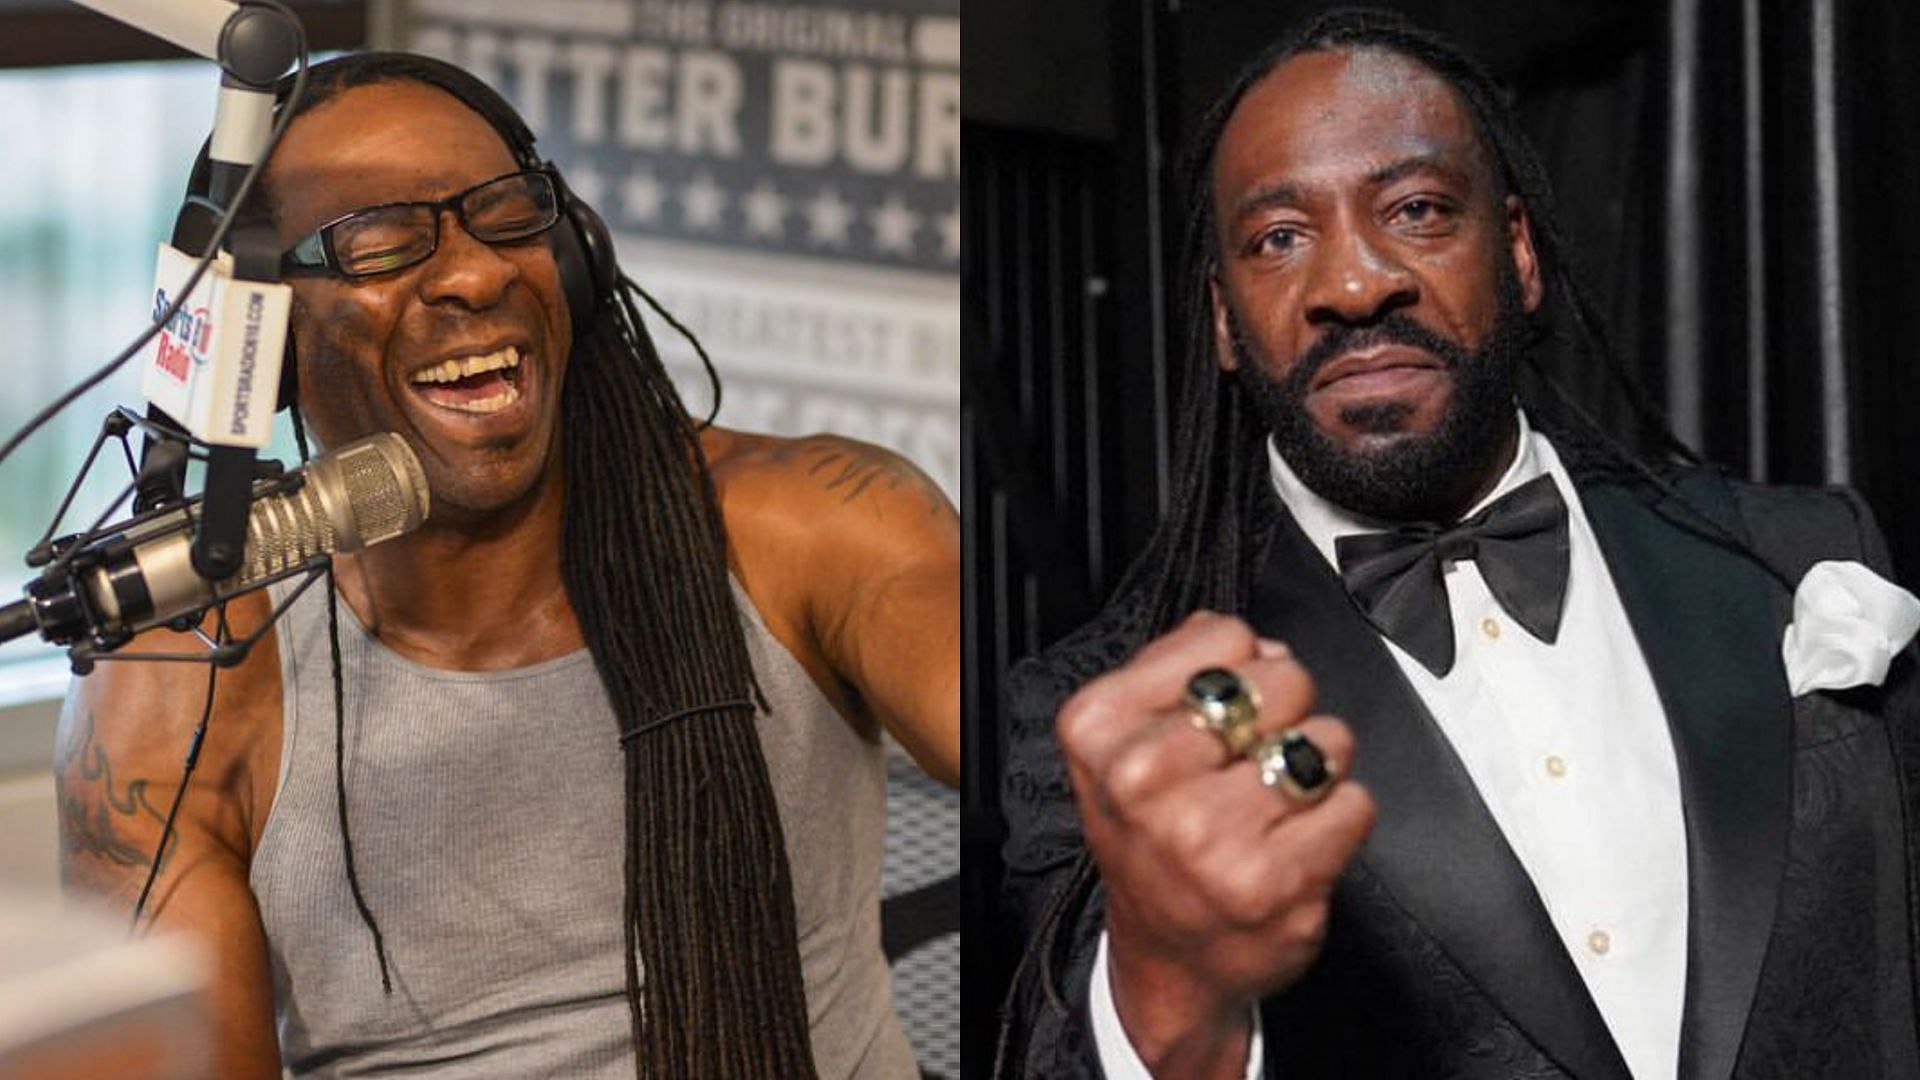 WWE Hall of Famer Booker T is now a color commentator on NXT